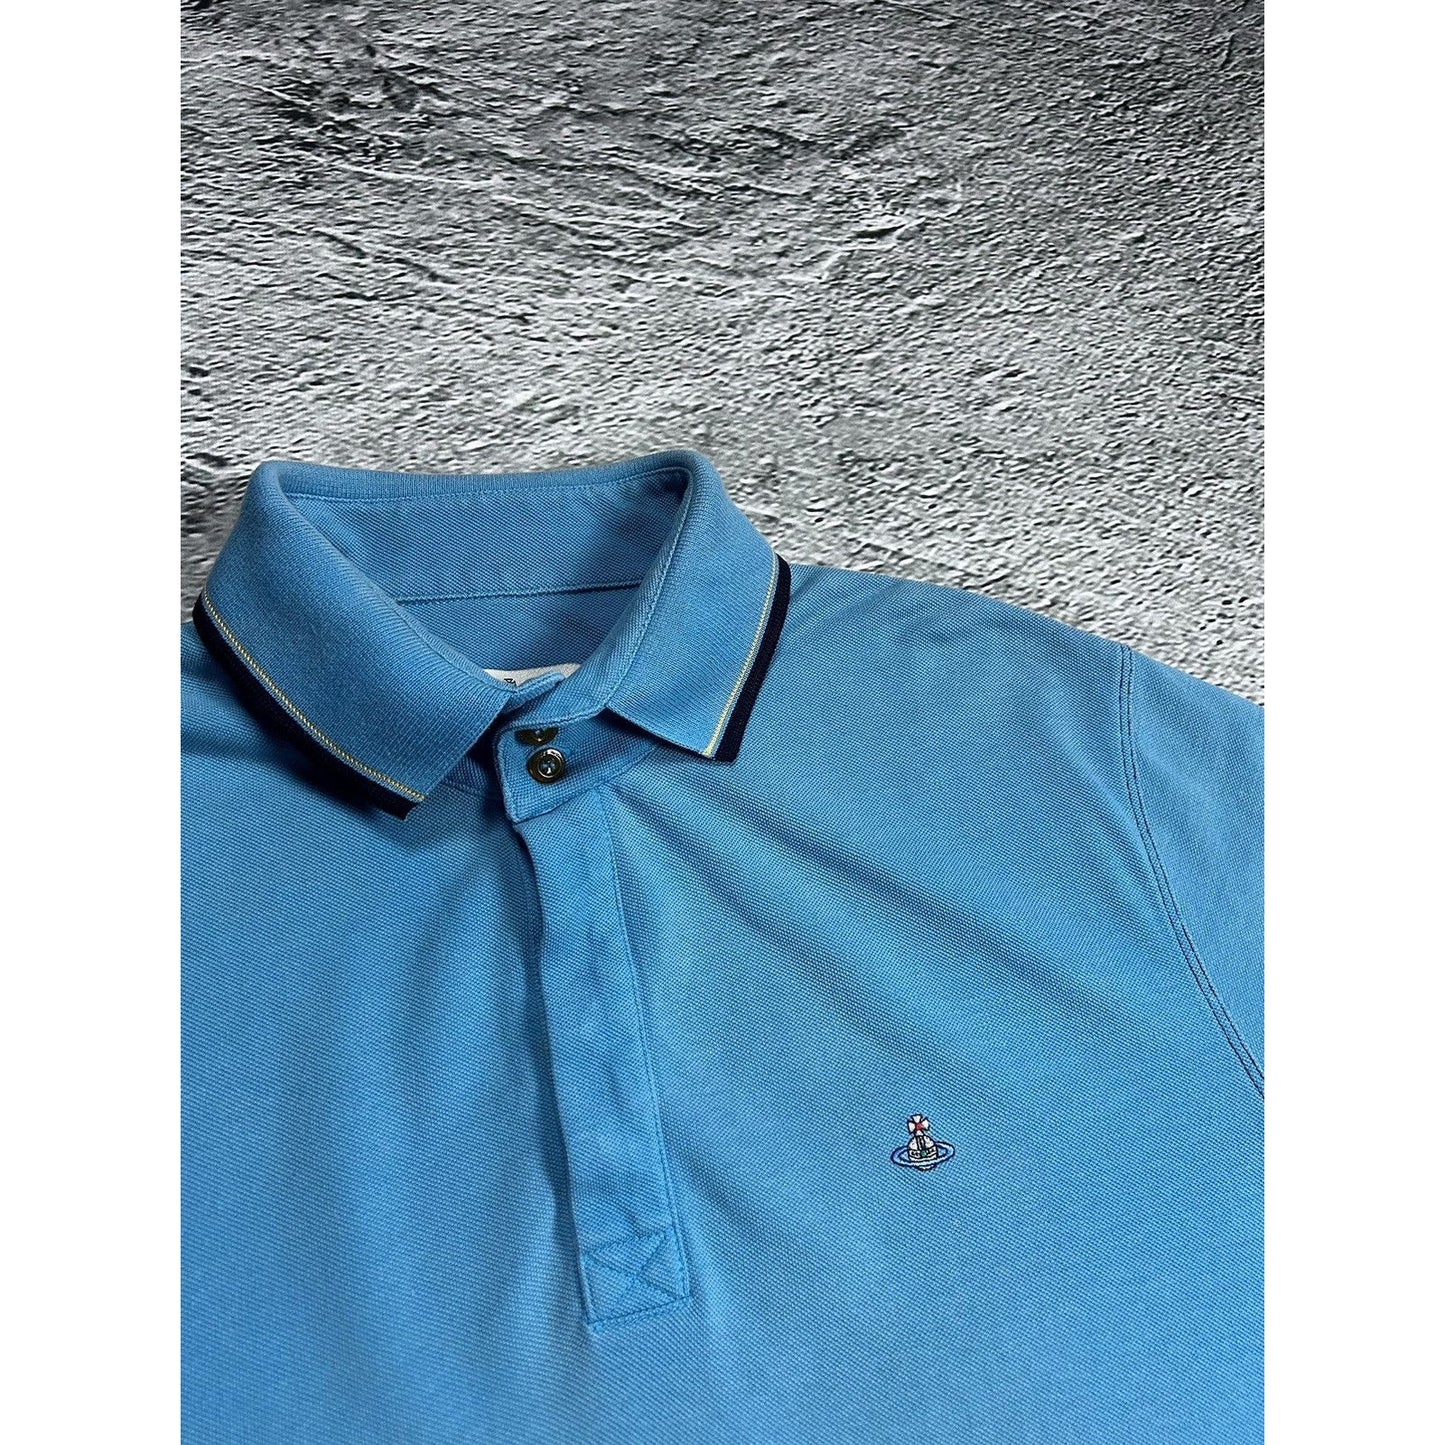 Vivienne Westwood polo t-shirt baby blue small logo